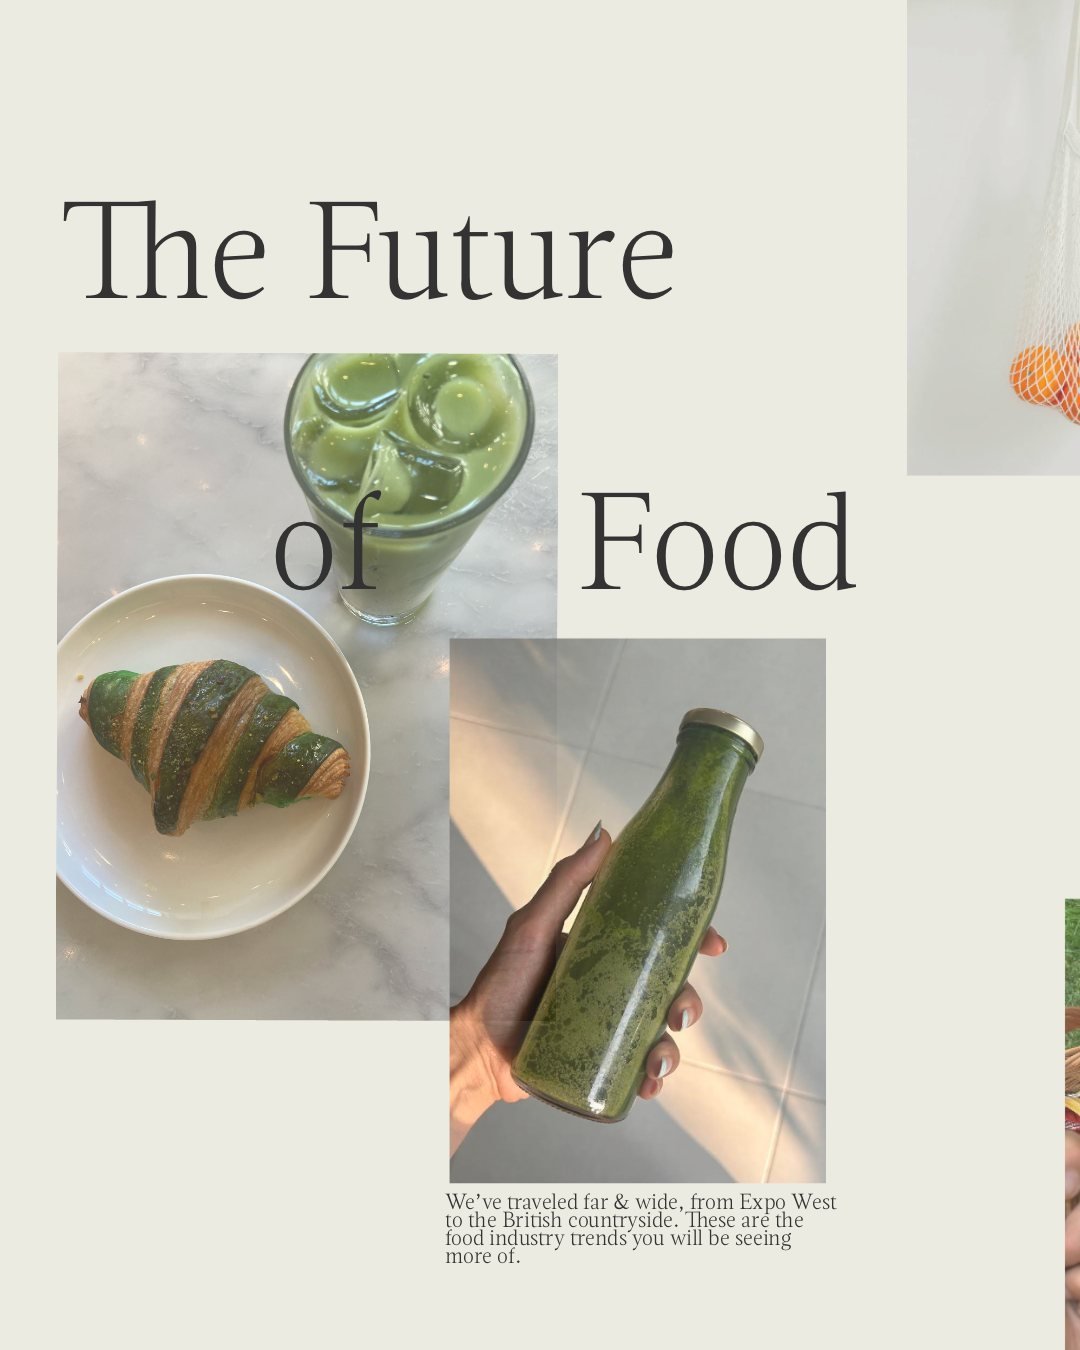 Foodie Forecast: Cloudy with a Chance of Girl Dinner! 

From our recent travels to trade shows, conferences &amp; foodie destinations, we&rsquo;ve compiled a forecast of trends that are dominating consumer packaged foods! 

https://loom.ly/FIXYJEY